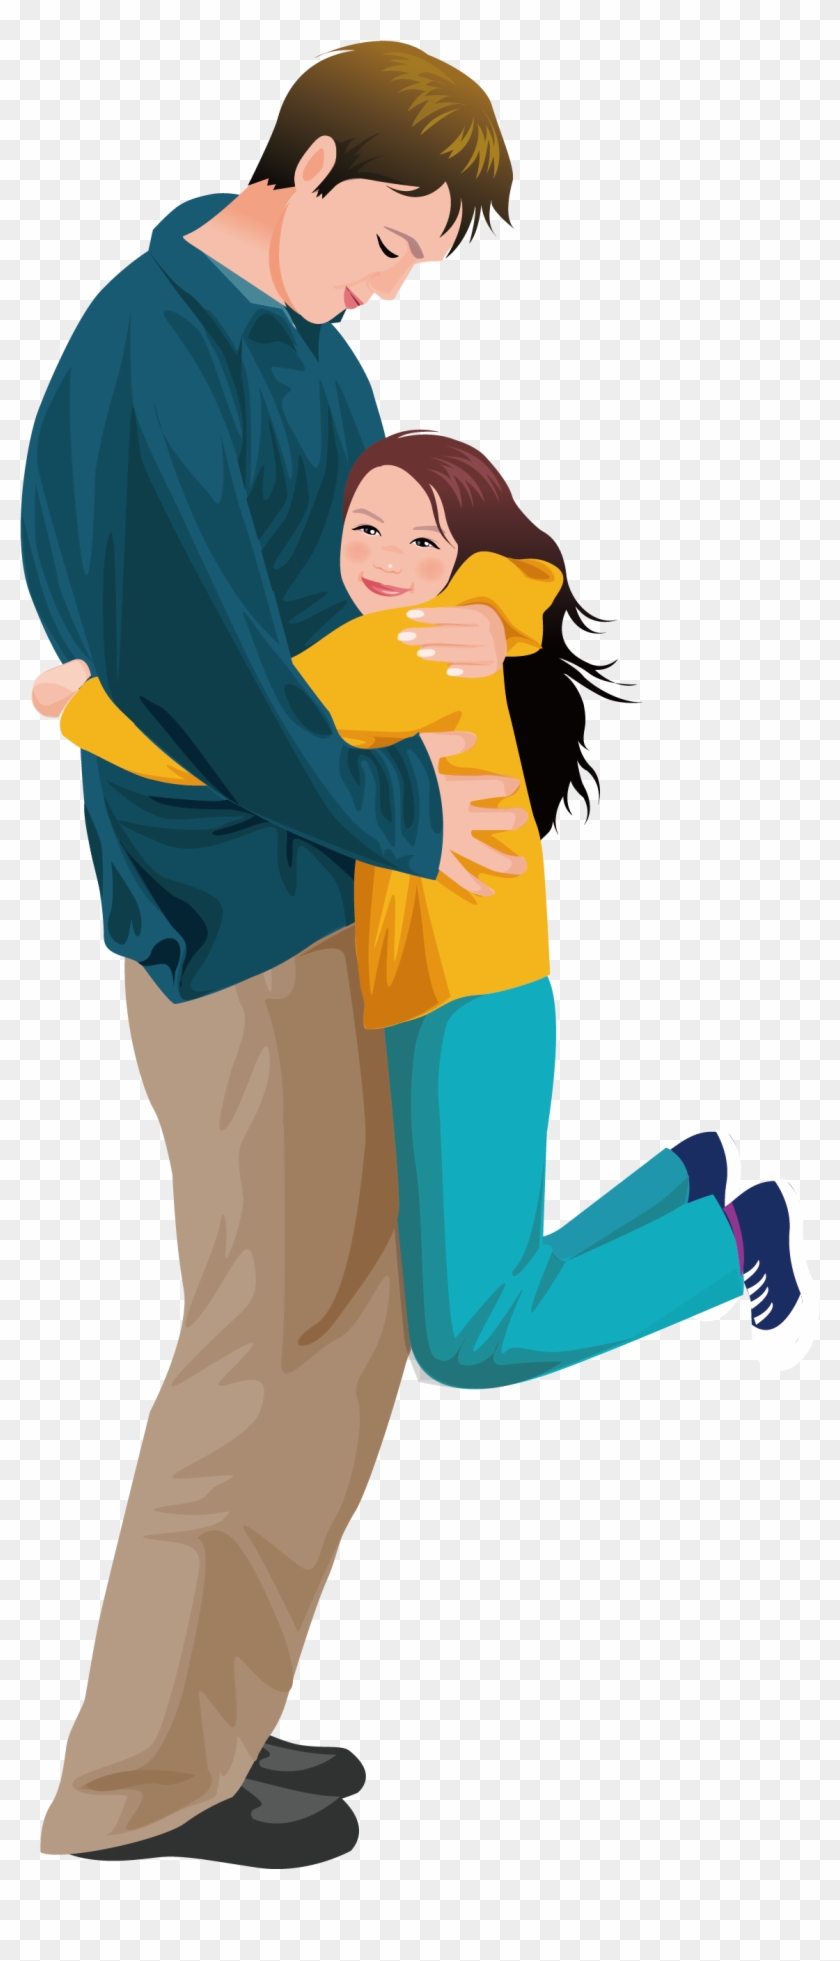 Father Daughter Hug Girl Illustration - Father And Daughter Illustration #806334